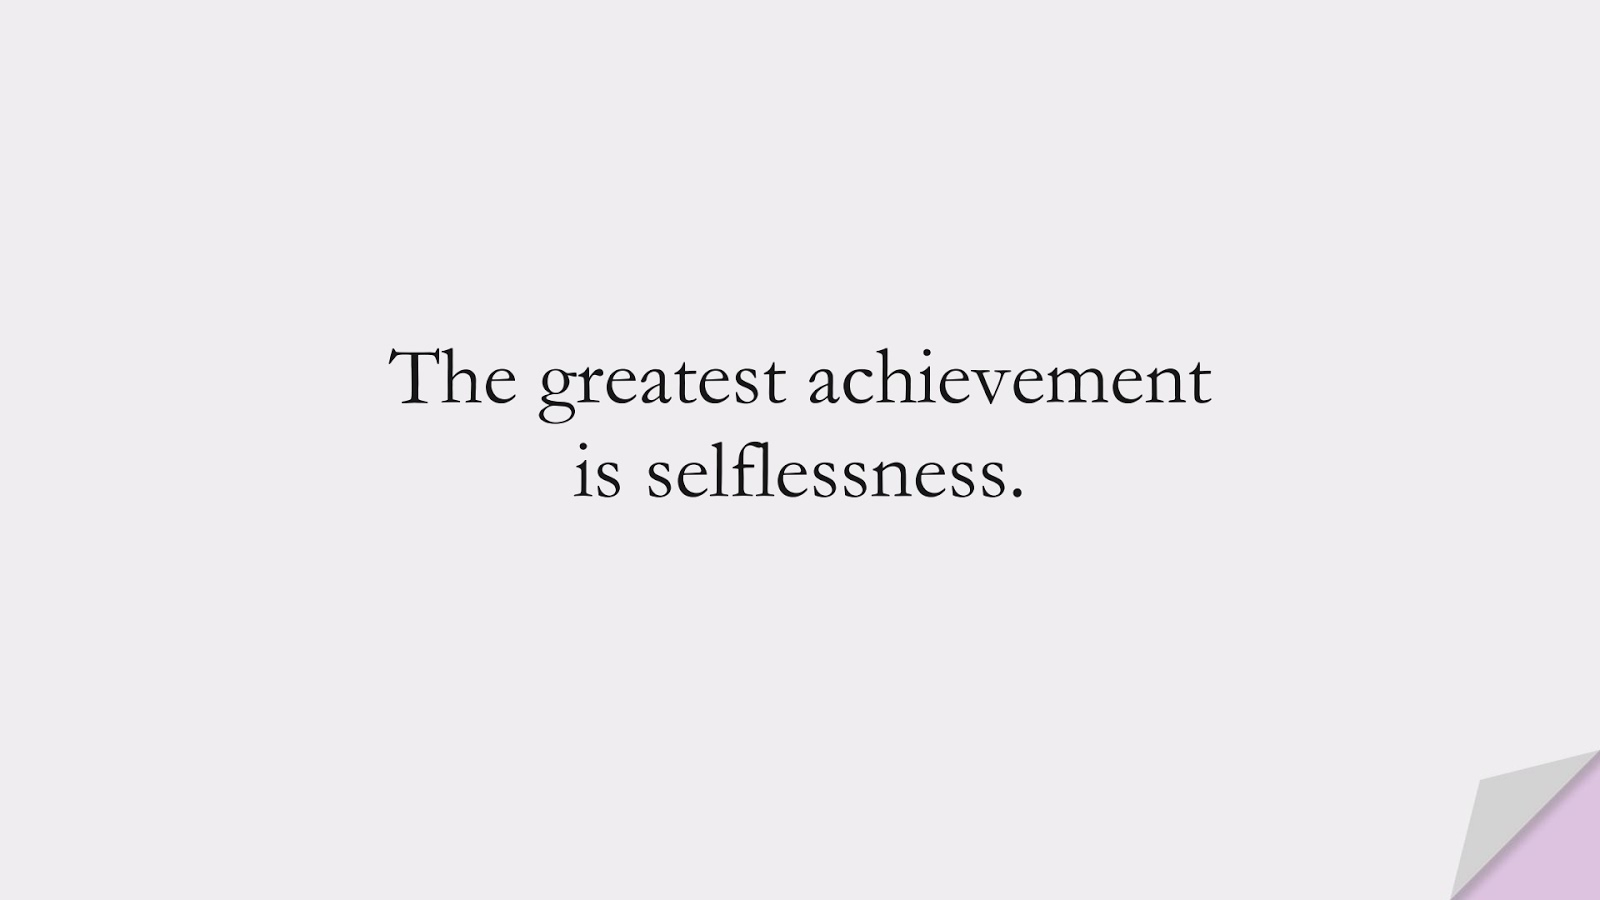 The greatest achievement is selflessness.FALSE